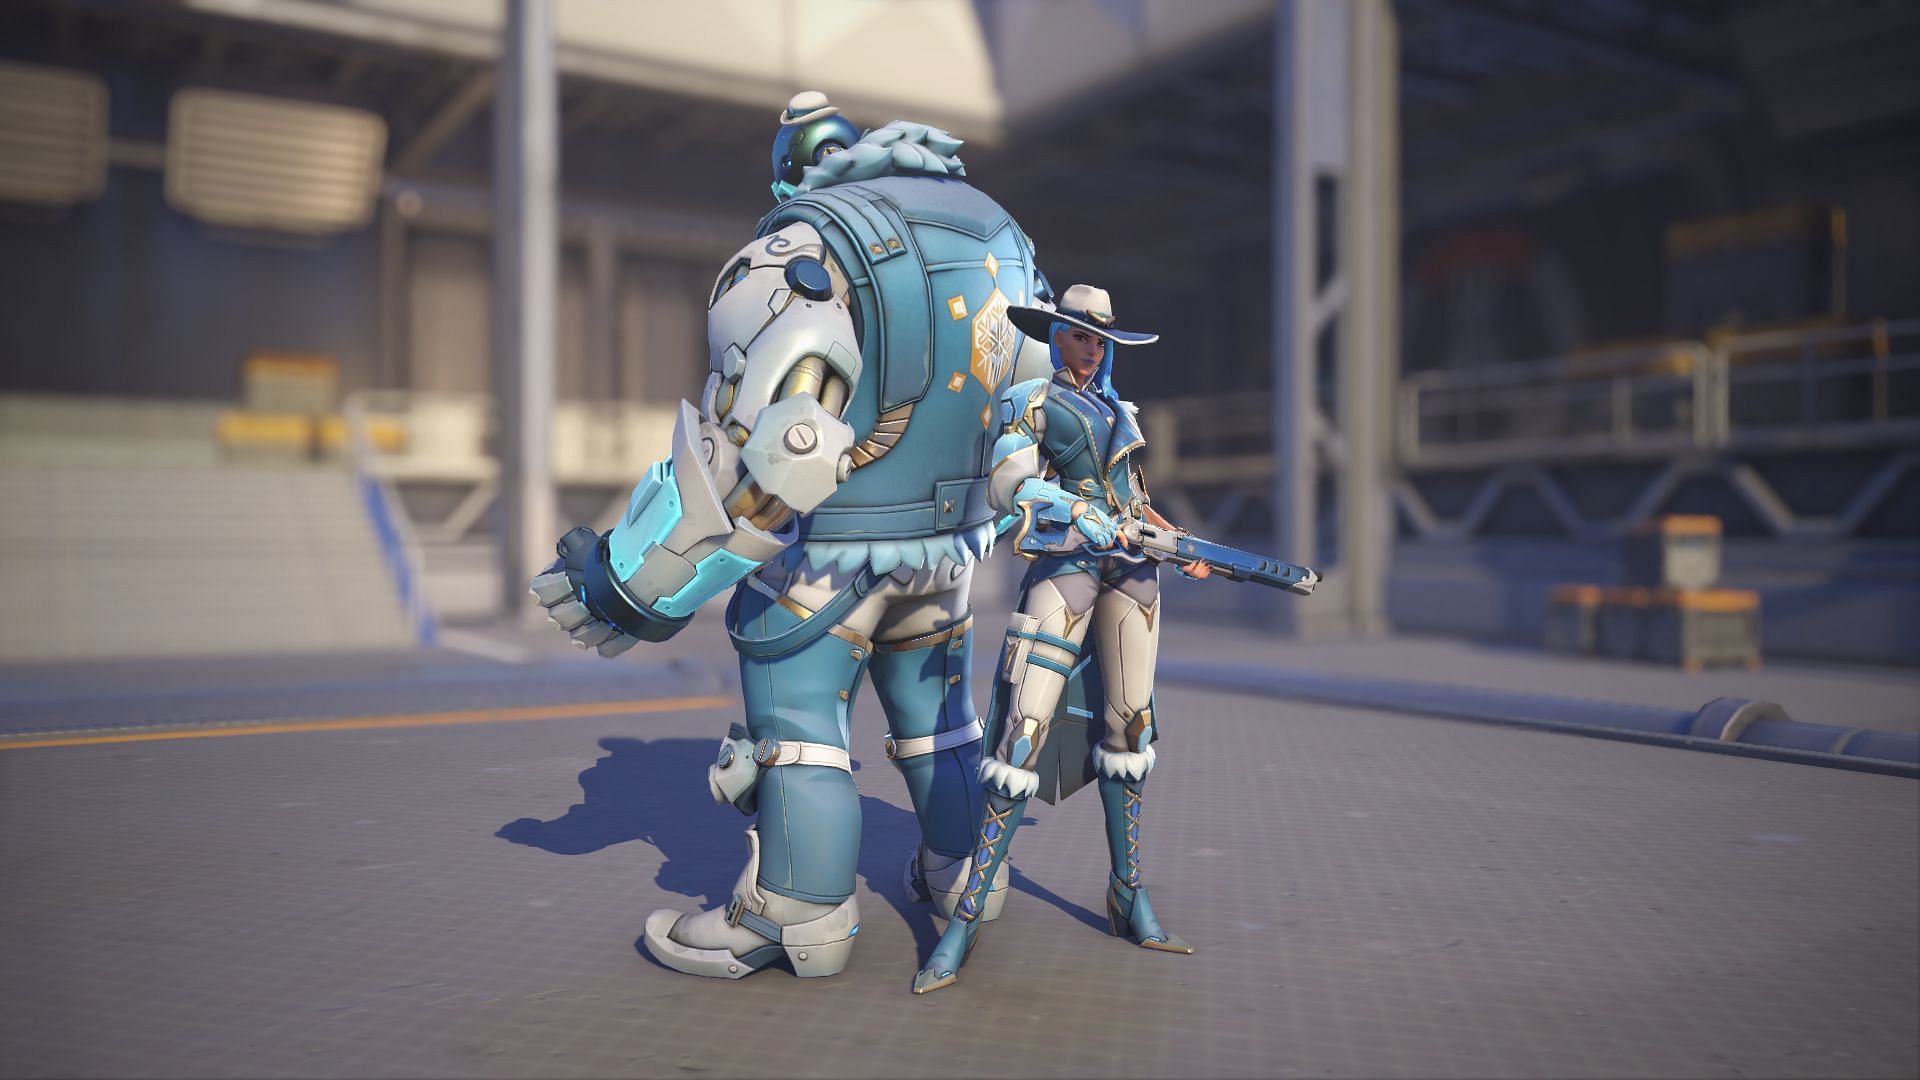 Winter skin as seen in the game (Image via Blizzard Entertainment)